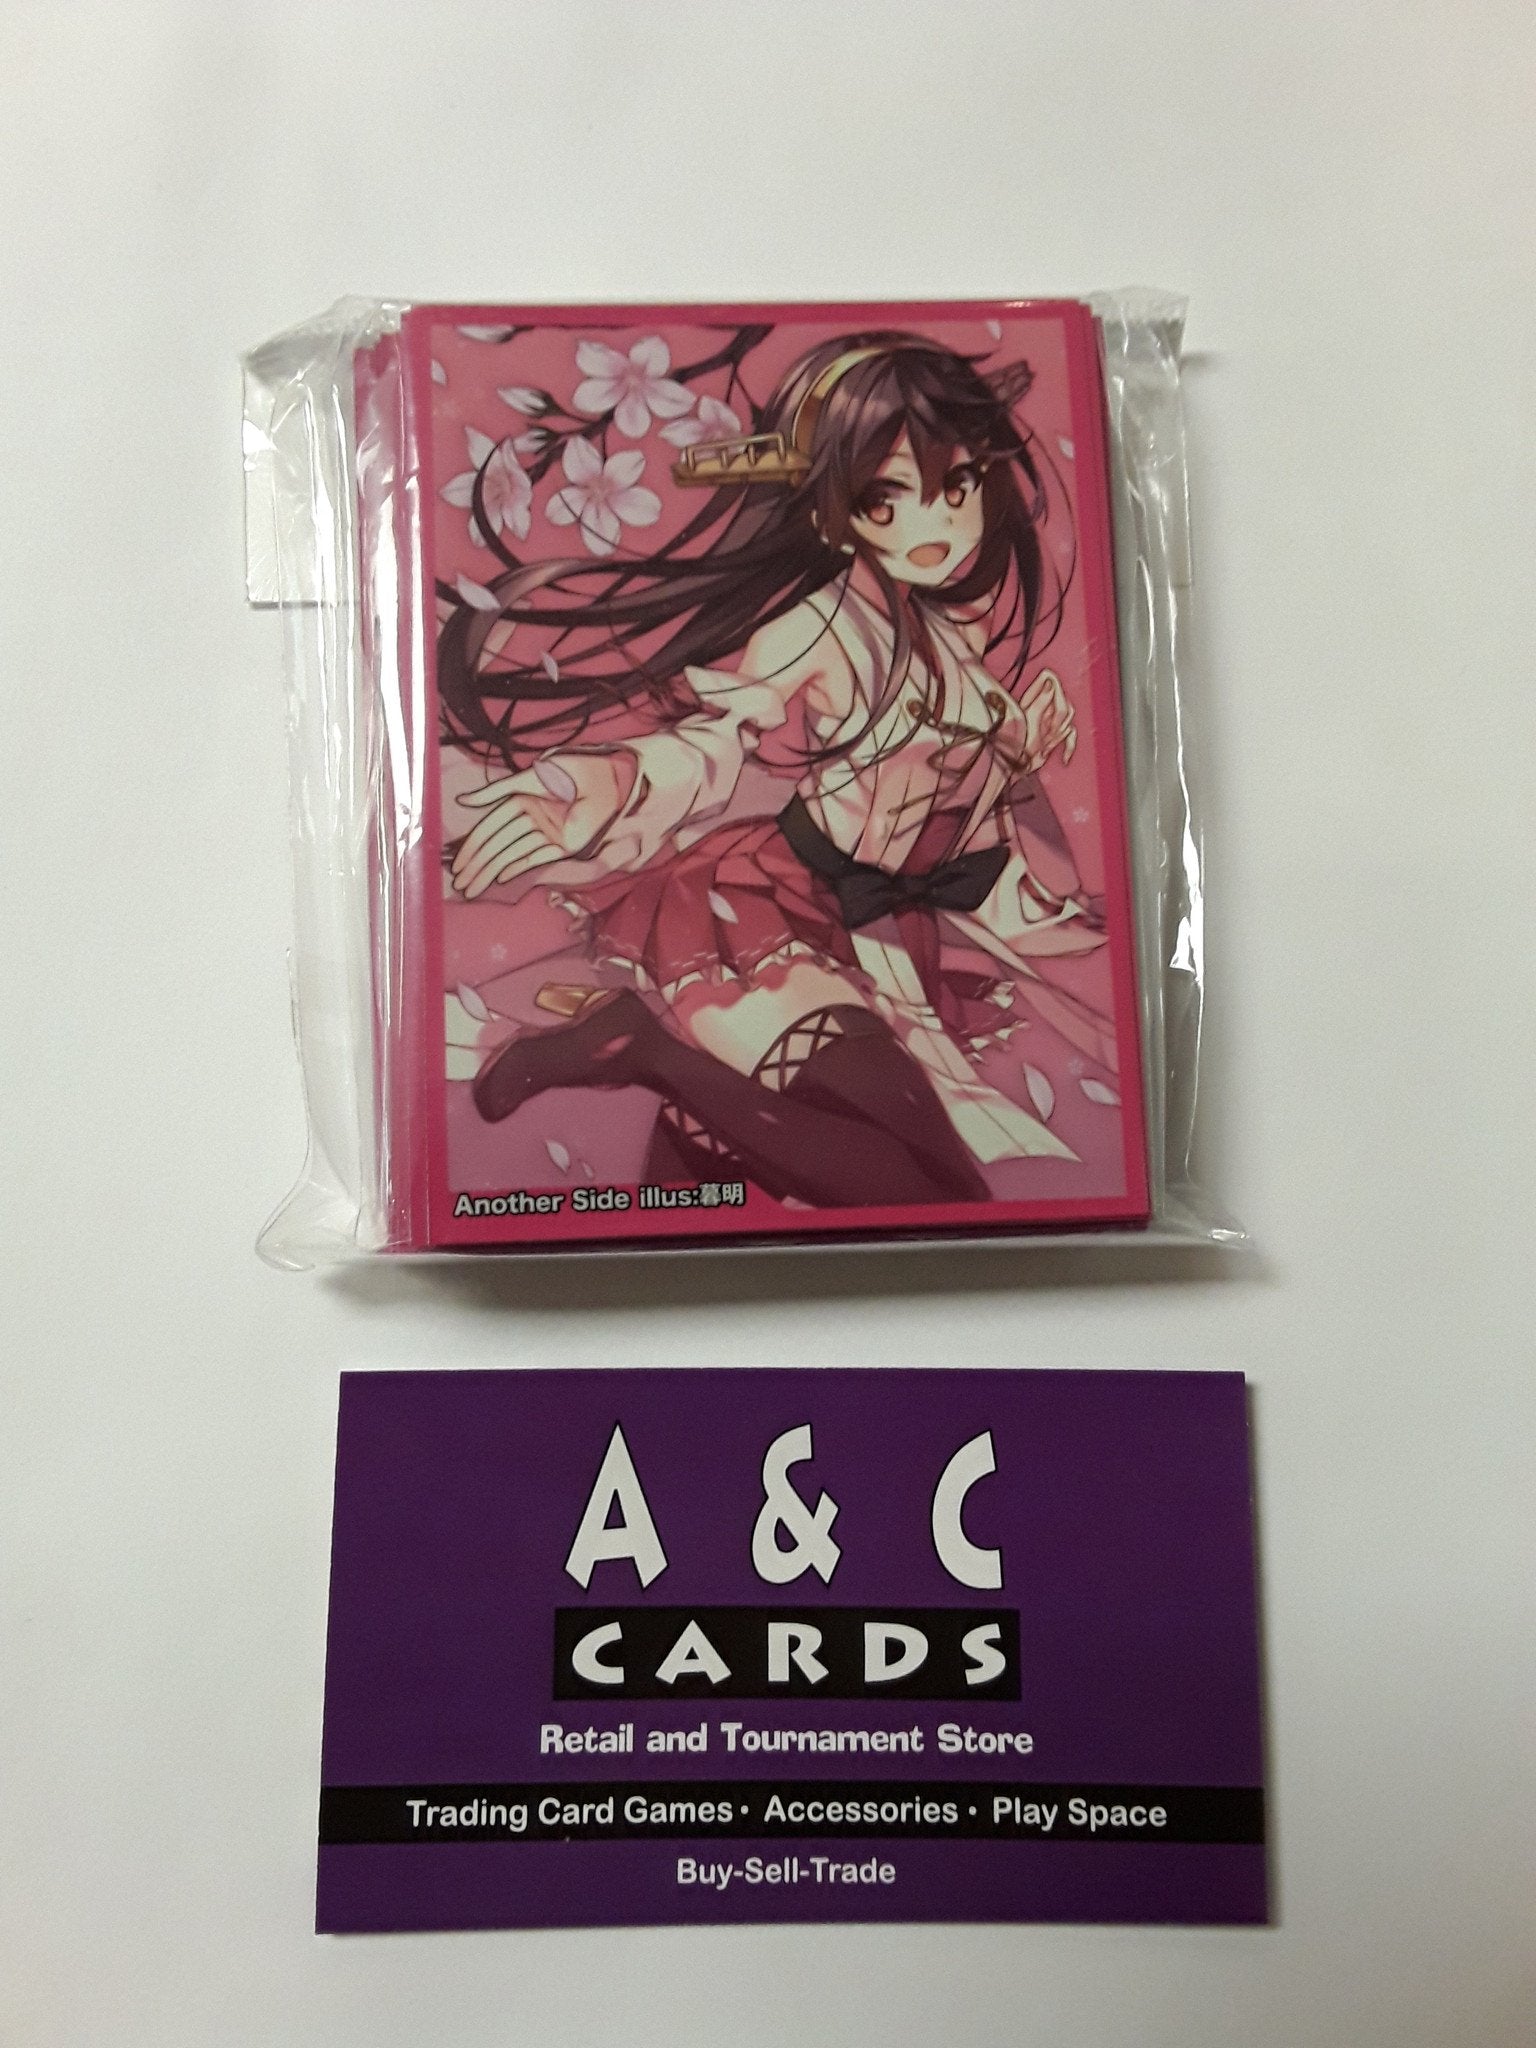 Character Sleeves "Haruna" #7 - 1 pack of Standard Size Sleeves - Kantai Collection